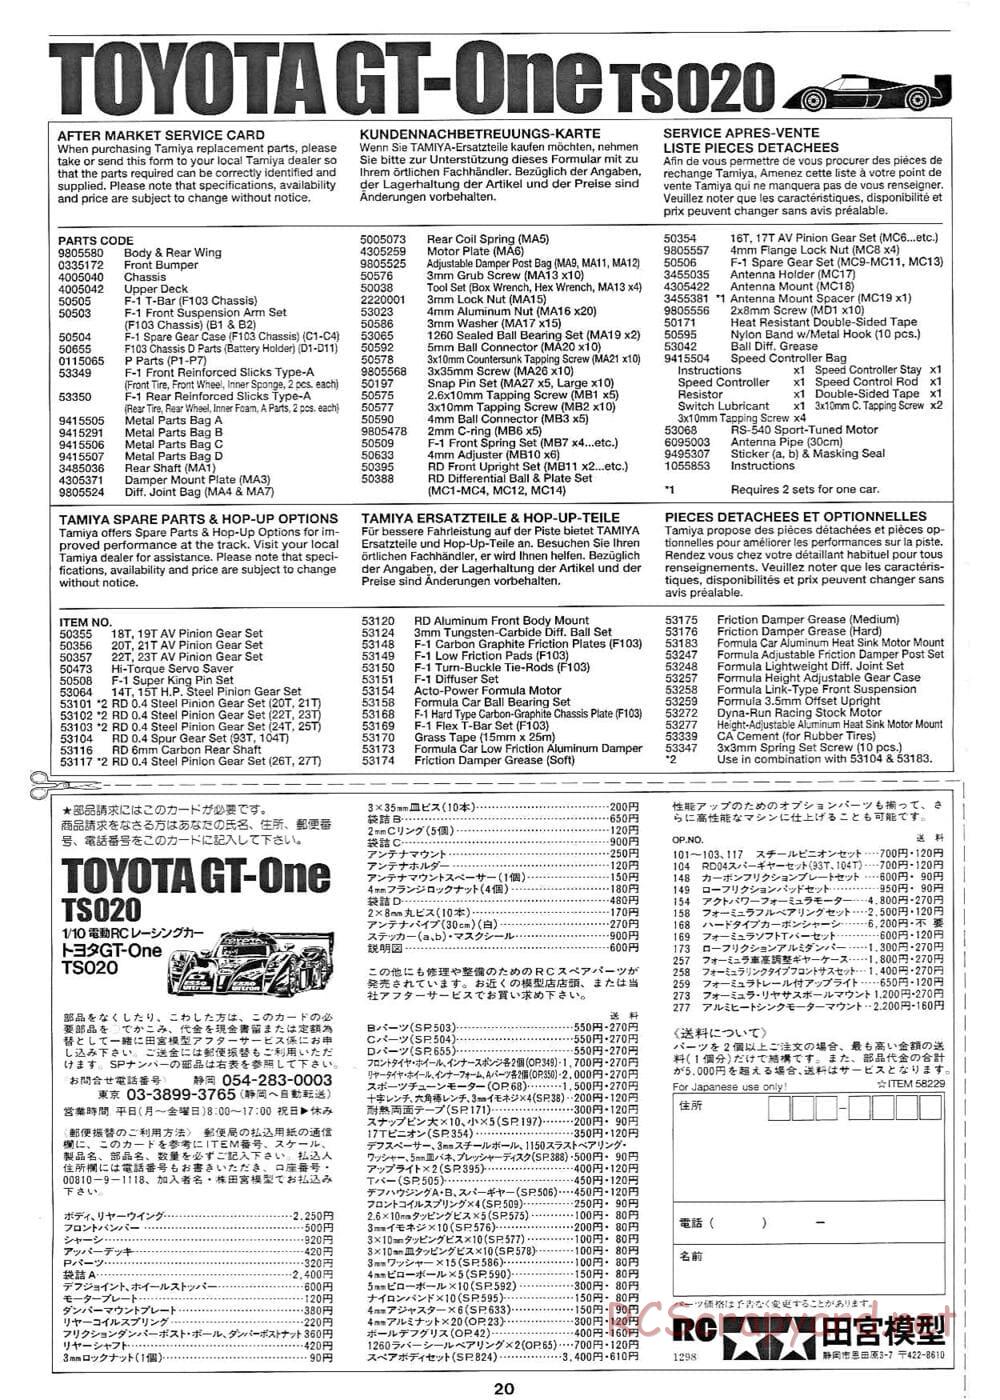 Tamiya - Toyota GT-One TS020 - F103RS Chassis - Manual - Page 20